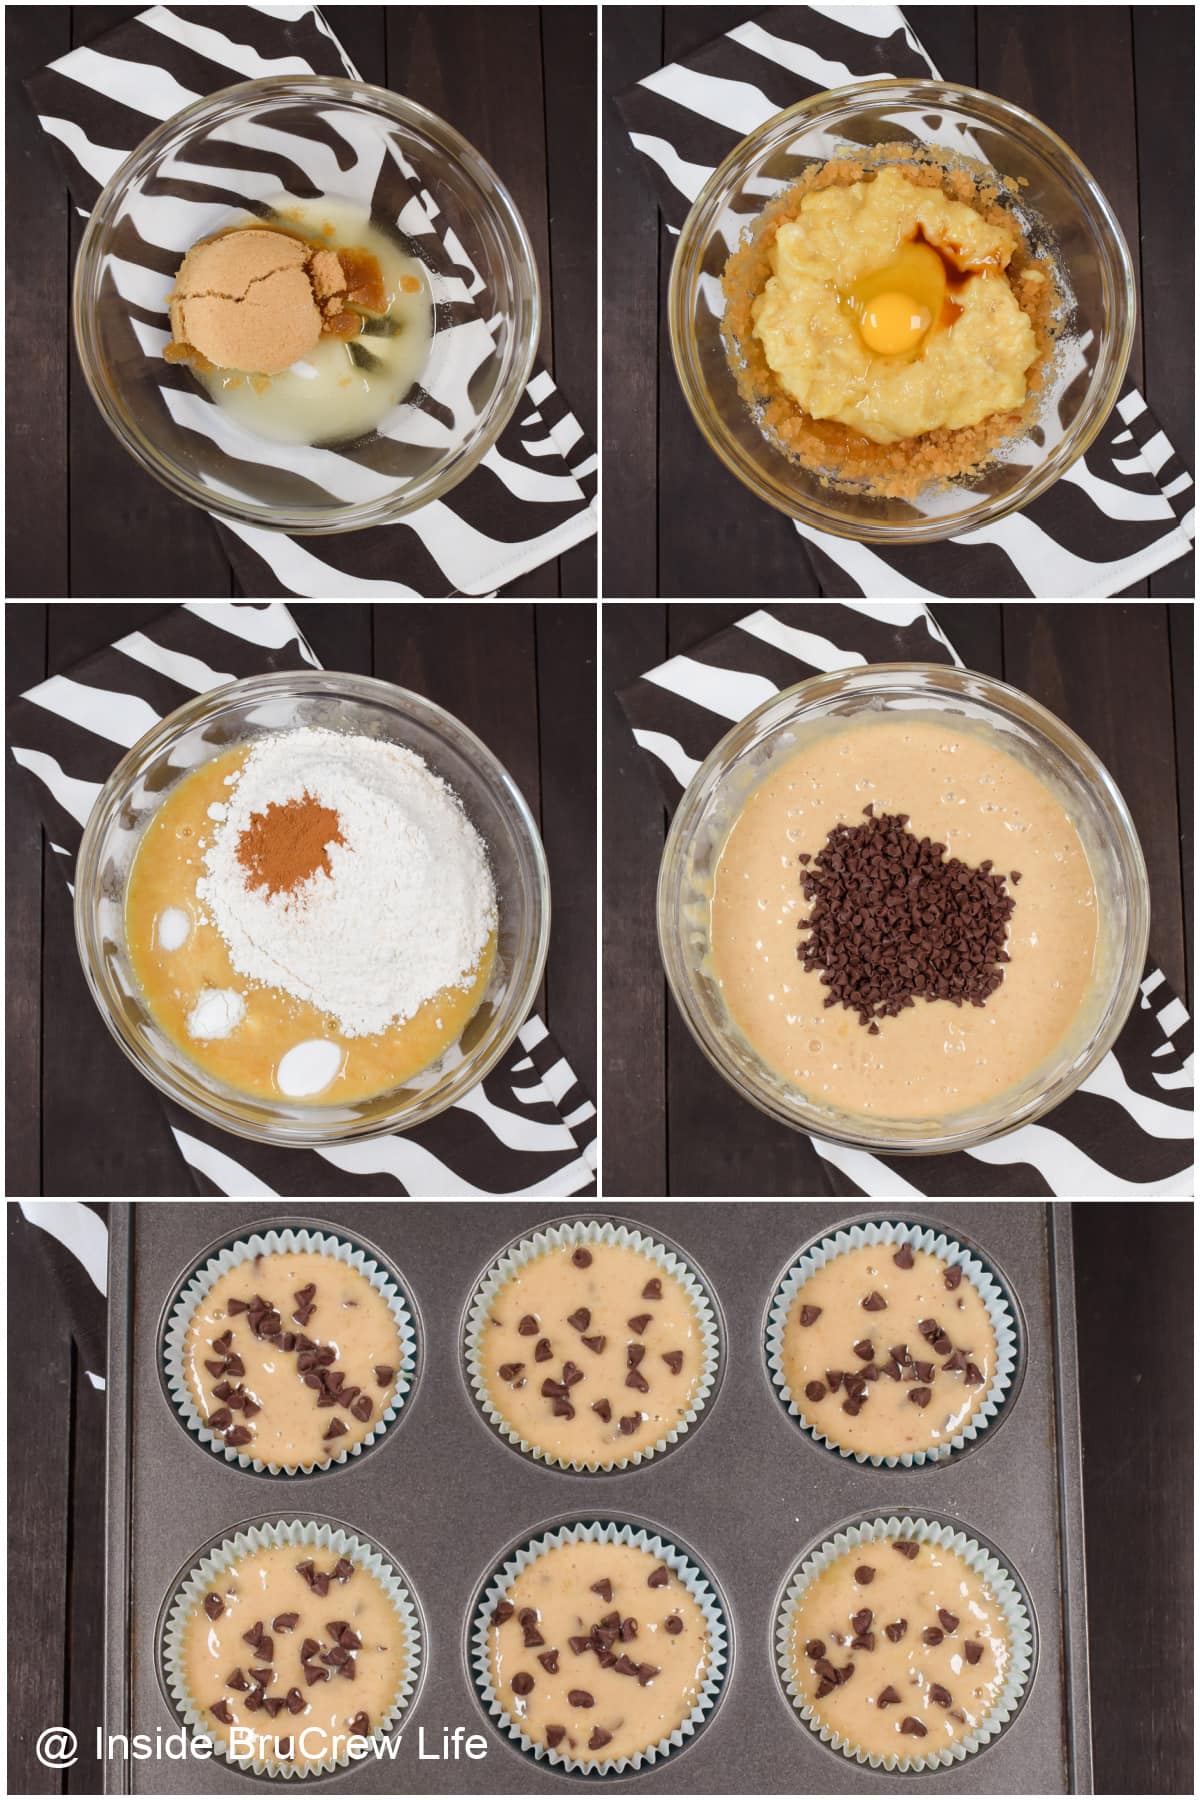 Five pictures collaged together showing how to make muffin batter and put it in muffin tins.